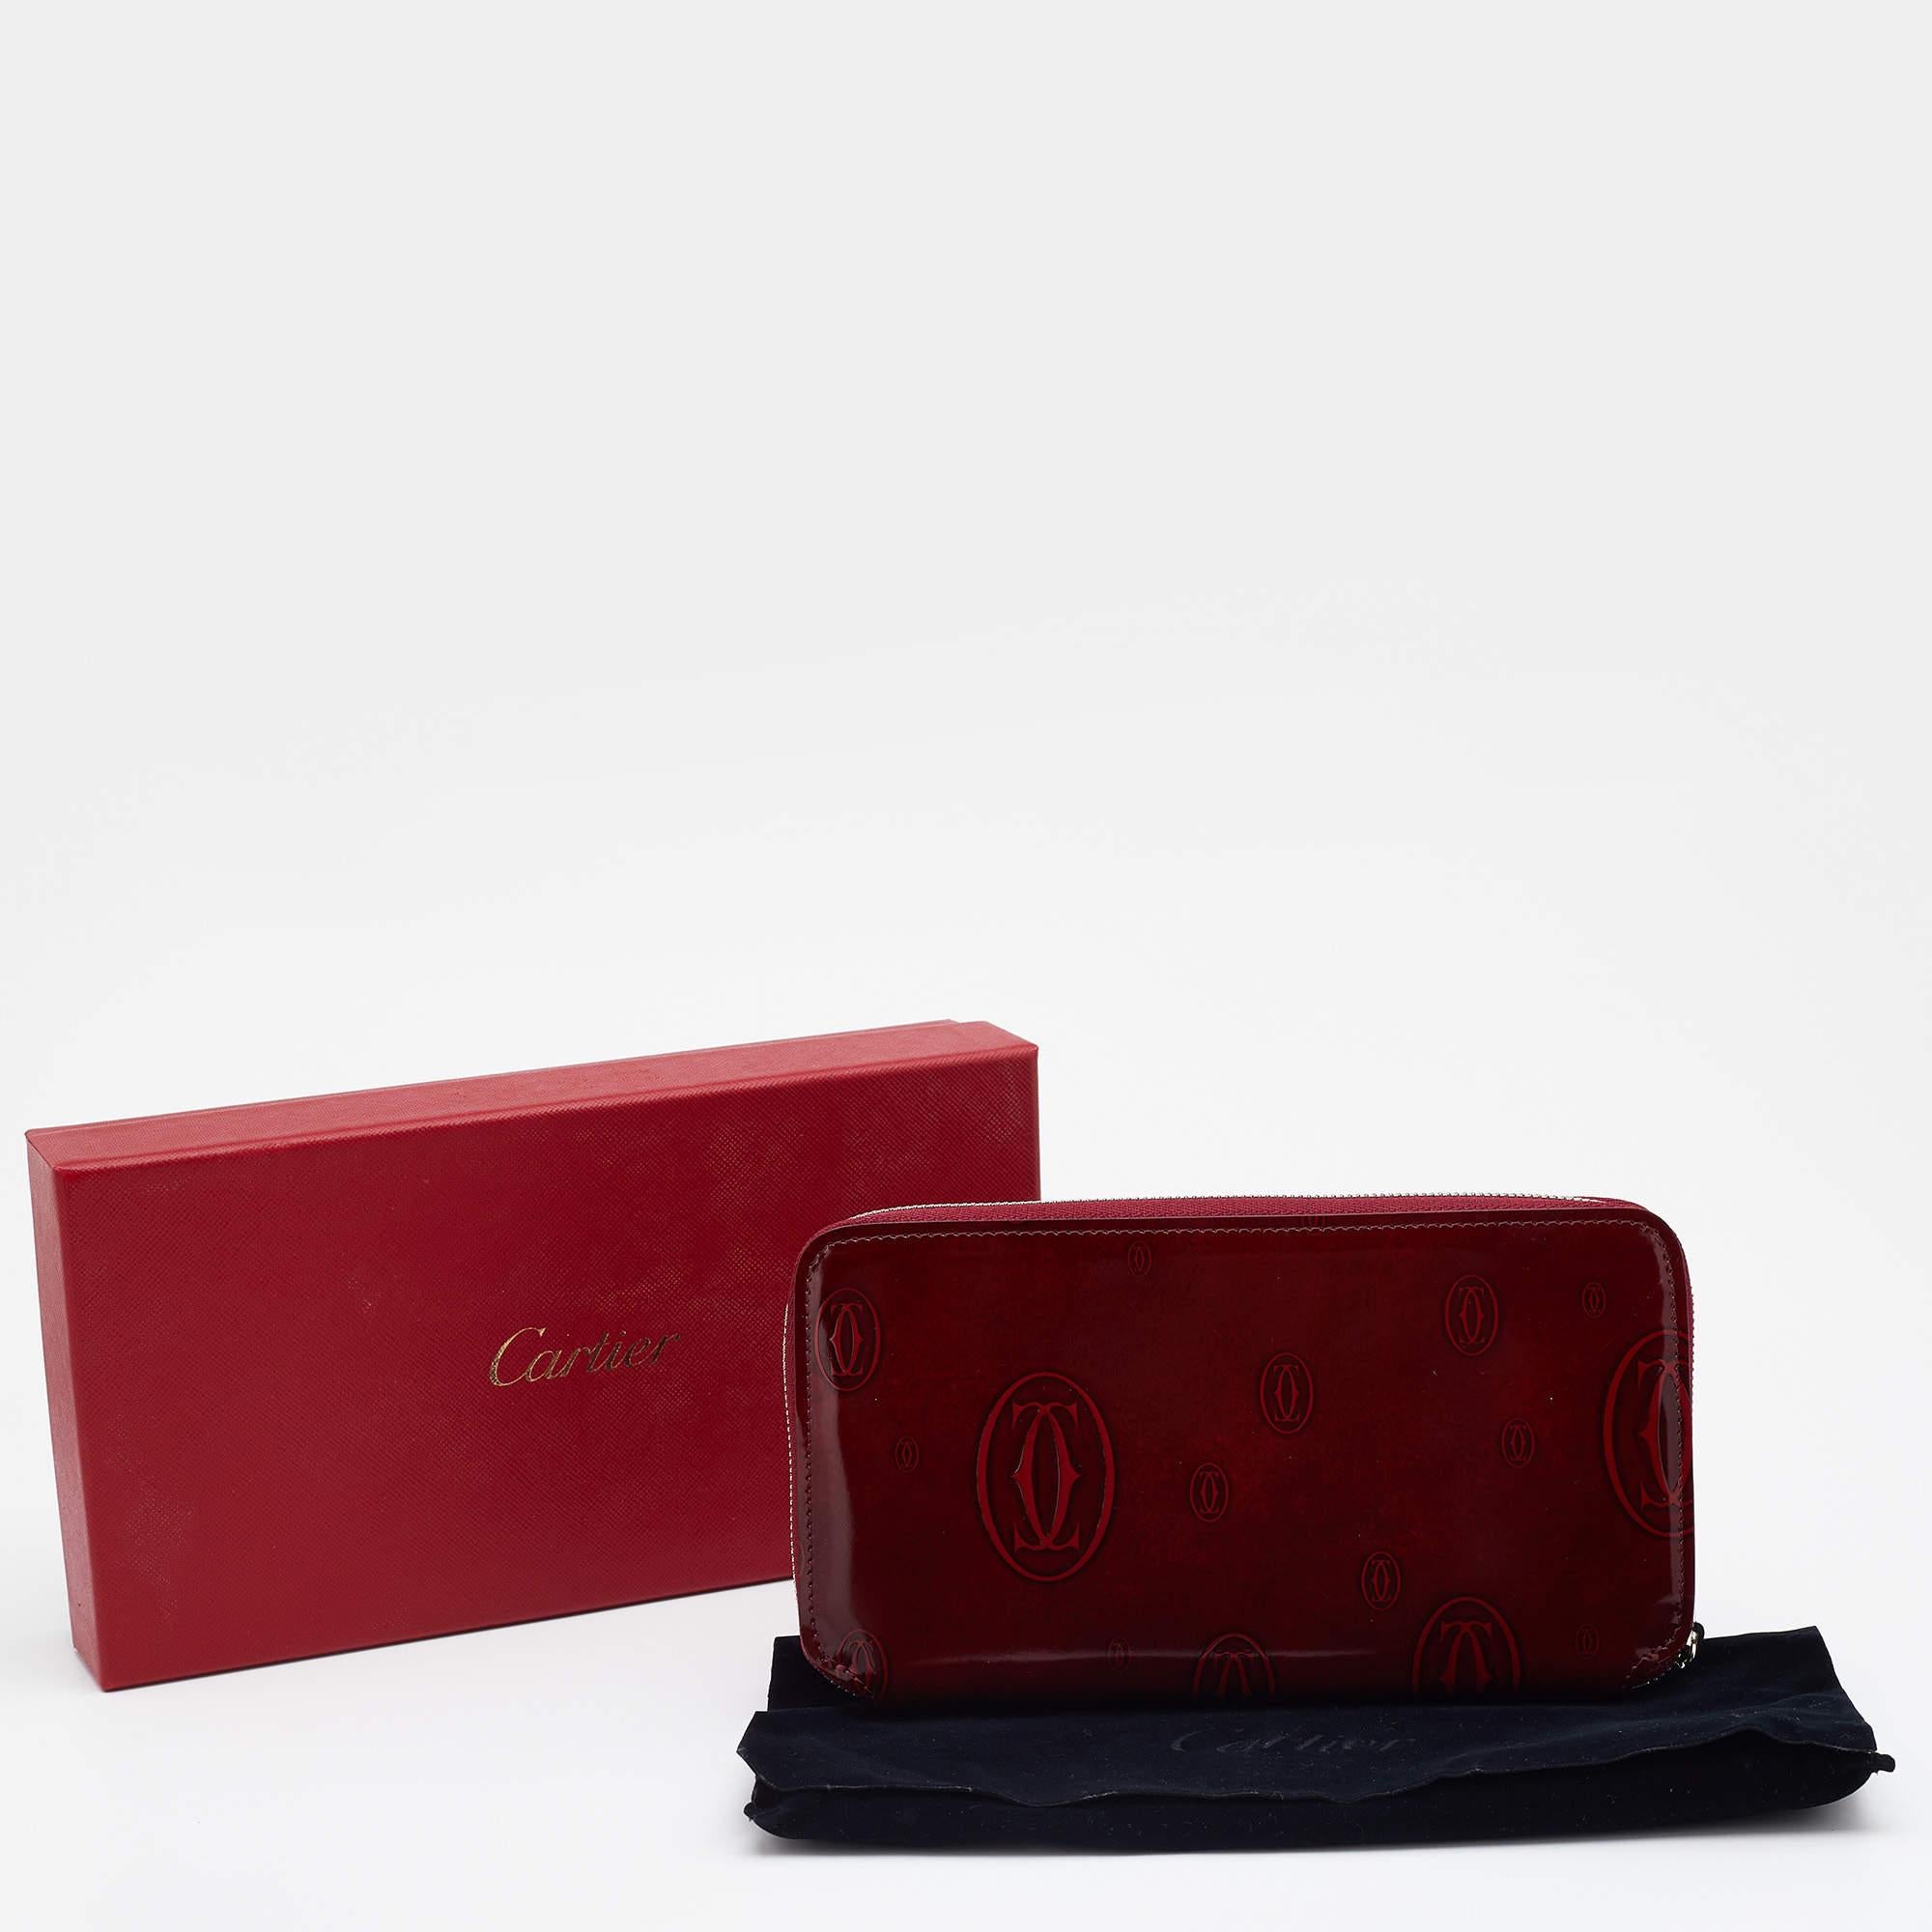 Cartier Red Glossy Leather Happy Birthday Zip Around Wallet 7